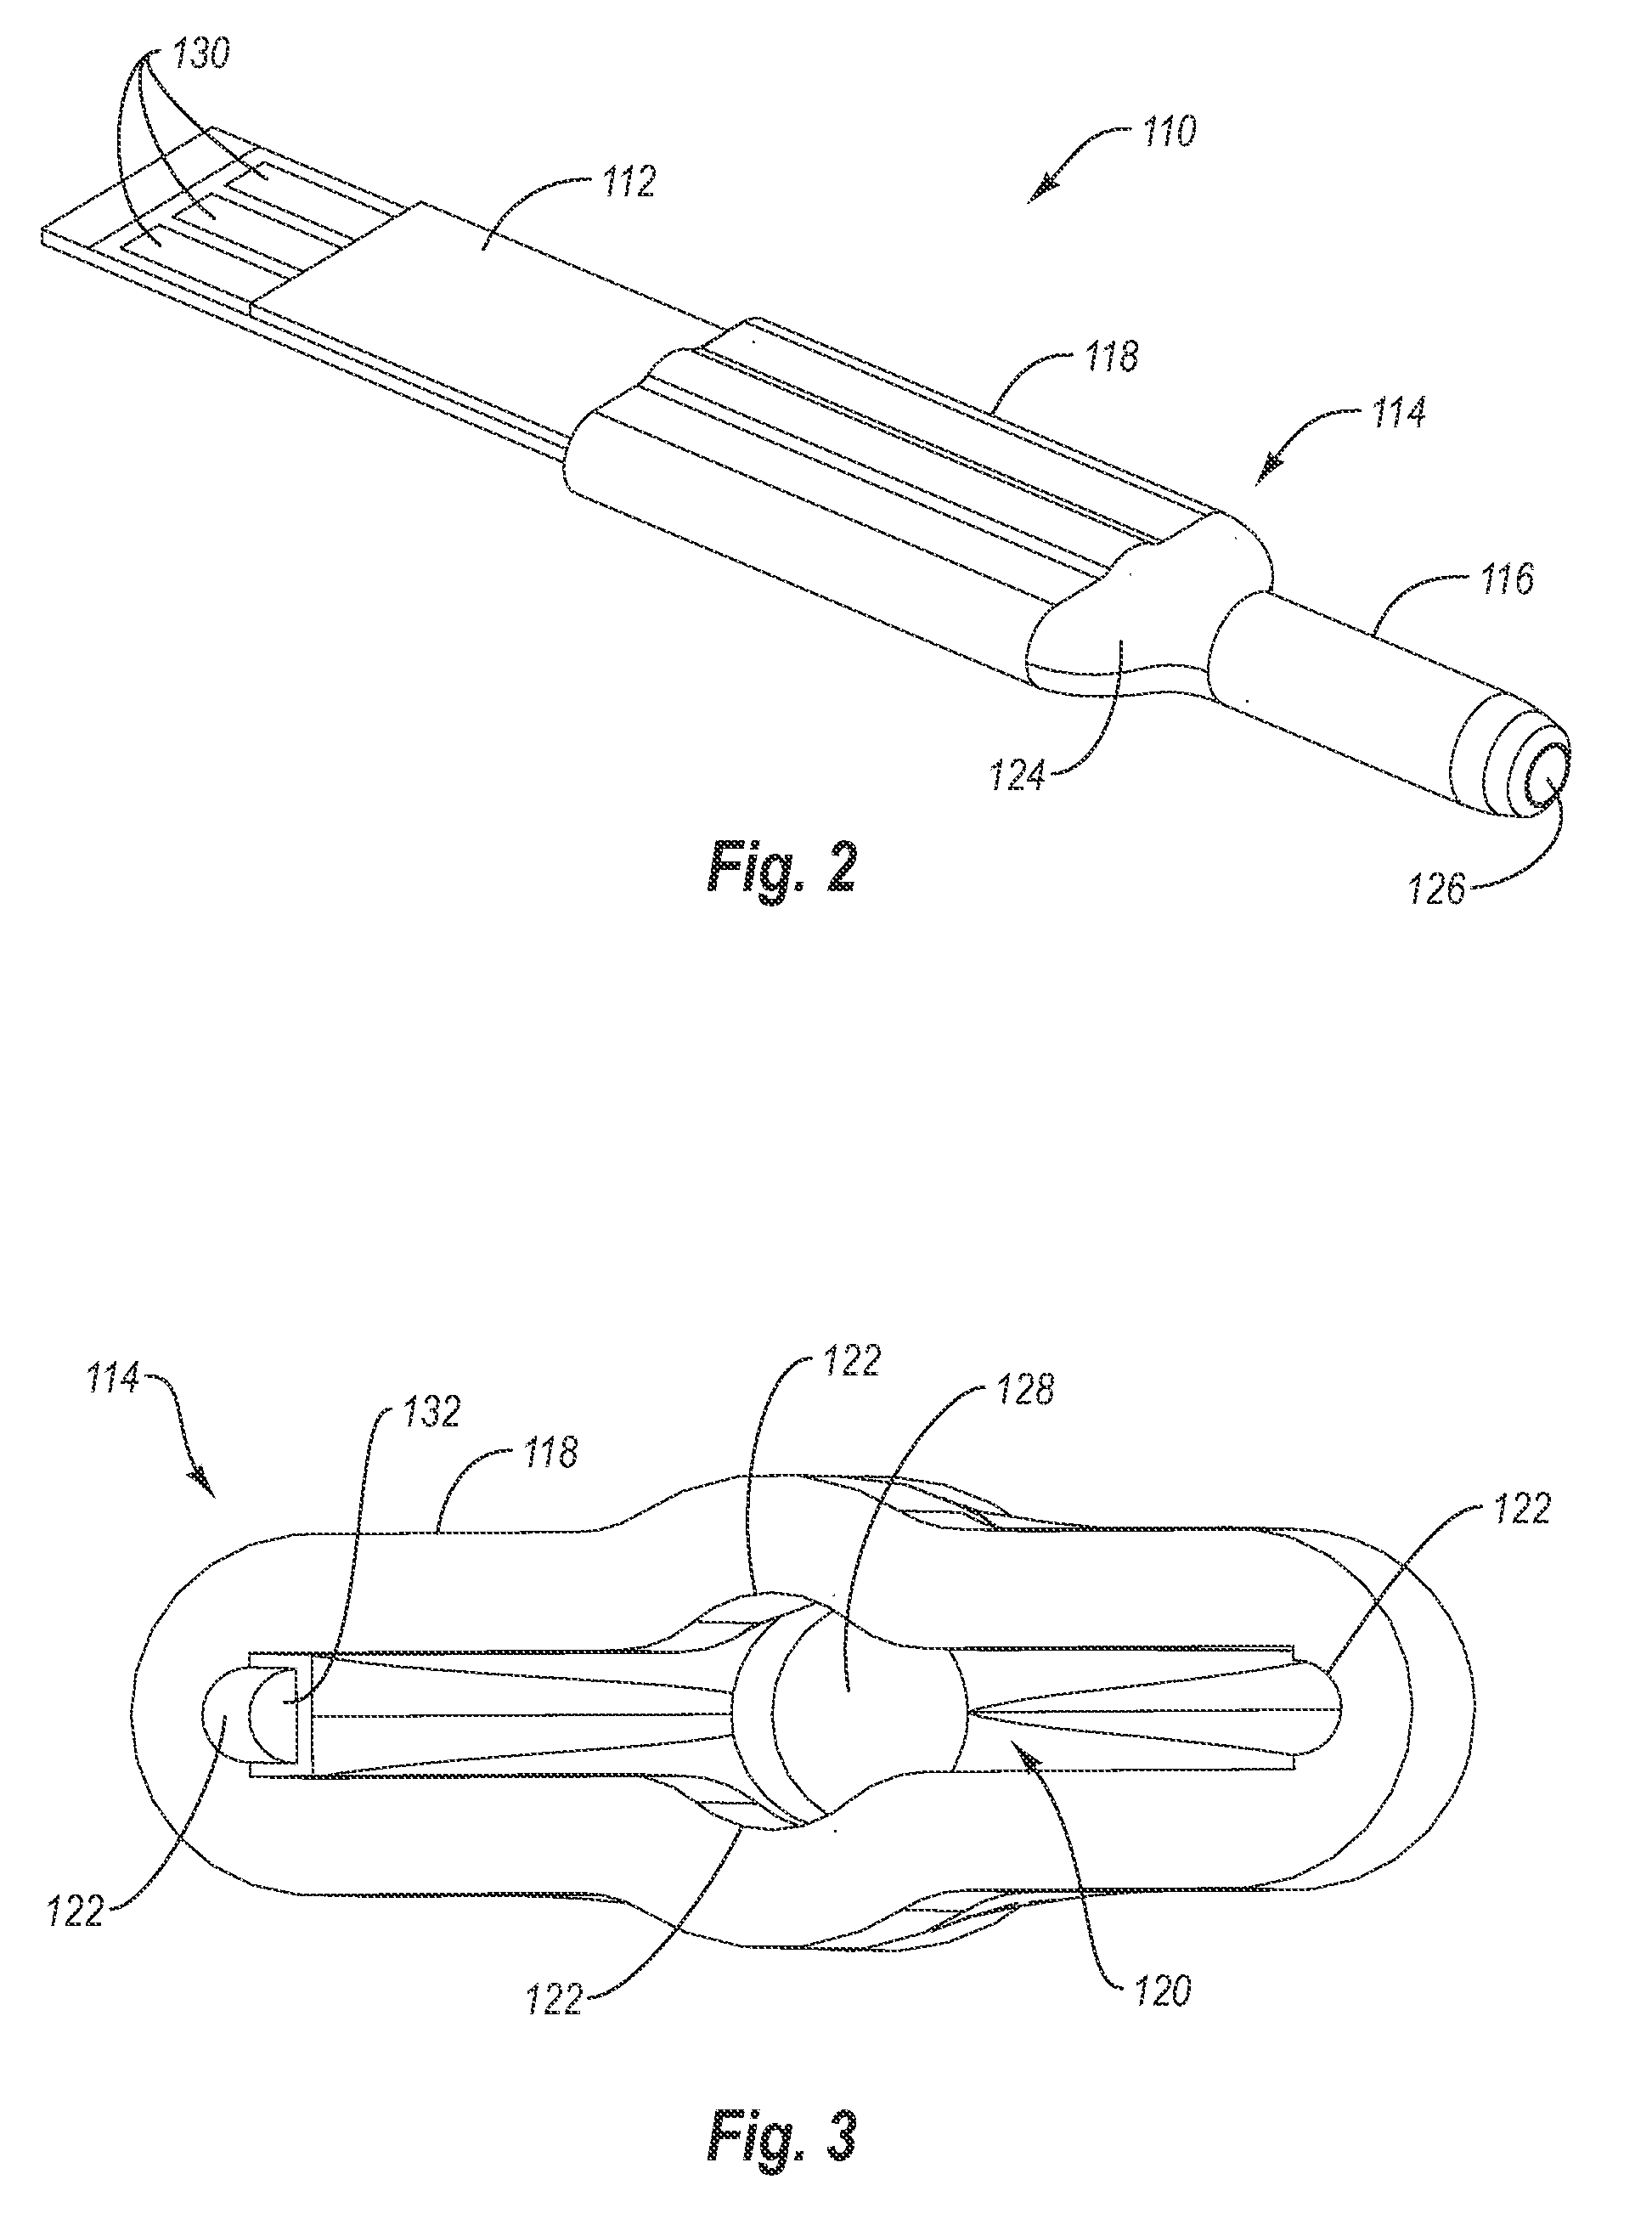 Bodily fluid sampling systems, methods, and devices